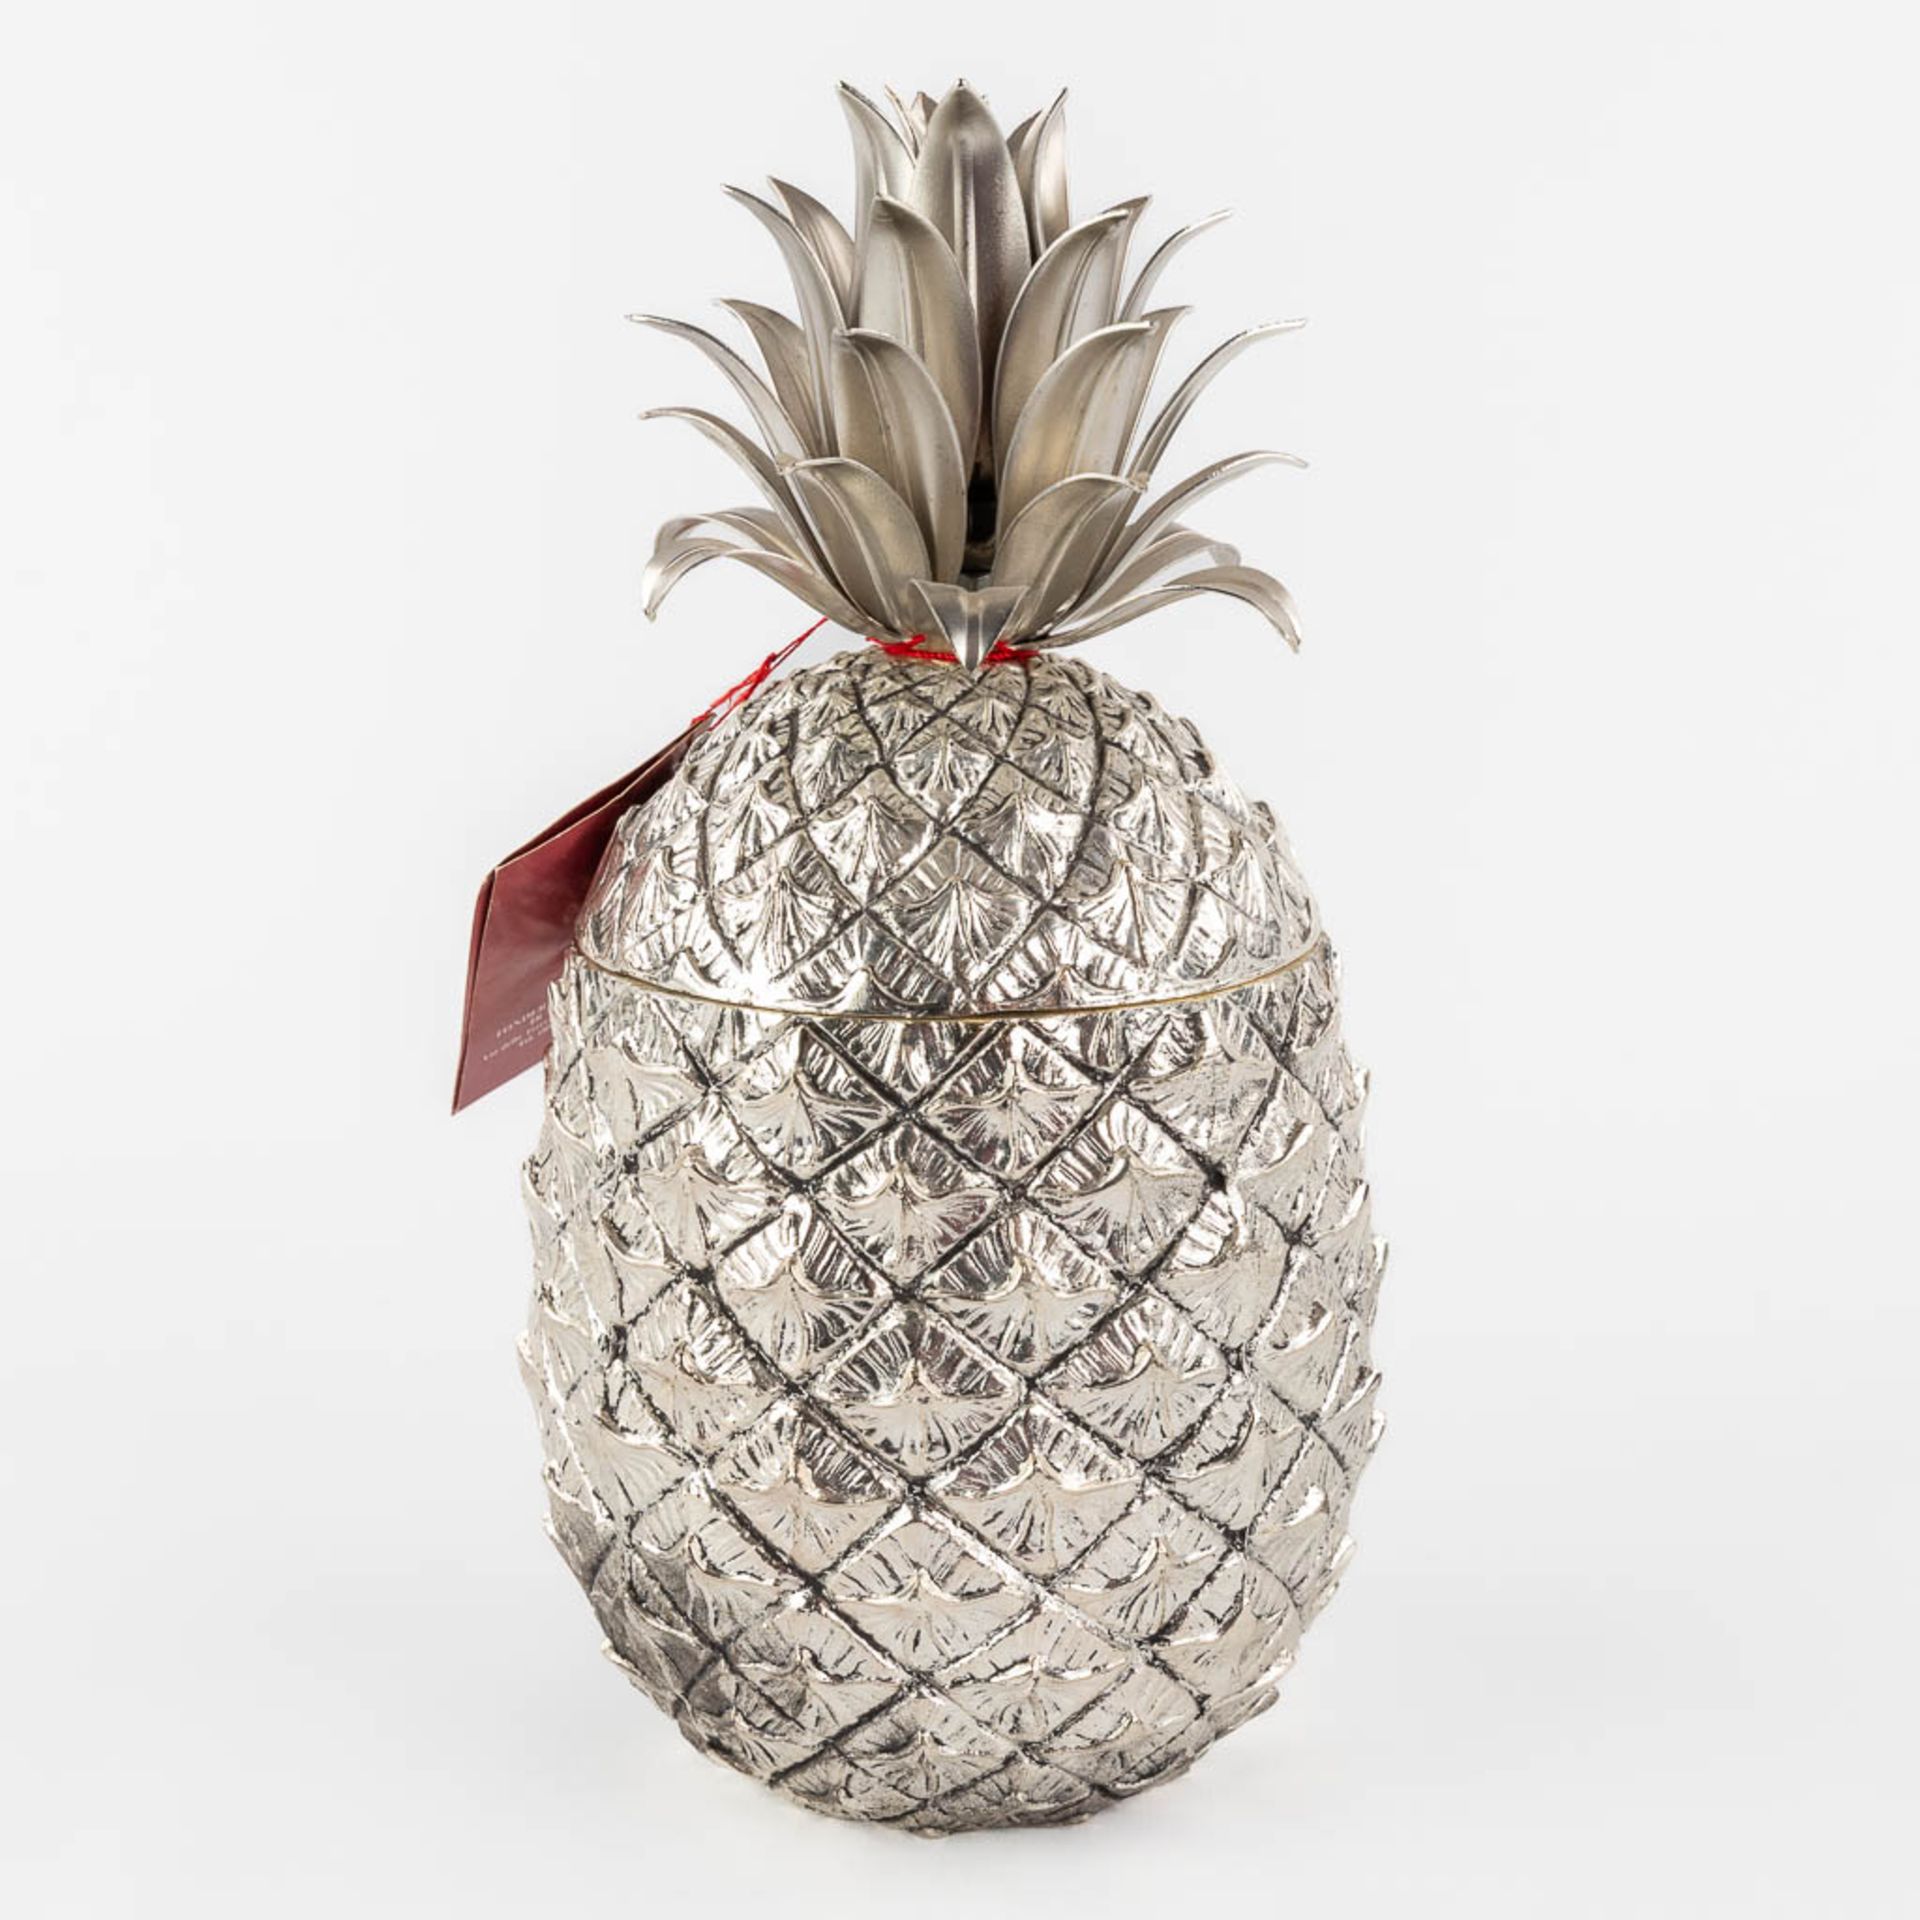 Mauro MANETTI (XX) 'Pineapple' an ice pail. Italy, 20th C. (H:26 x D:14 cm) - Image 5 of 10